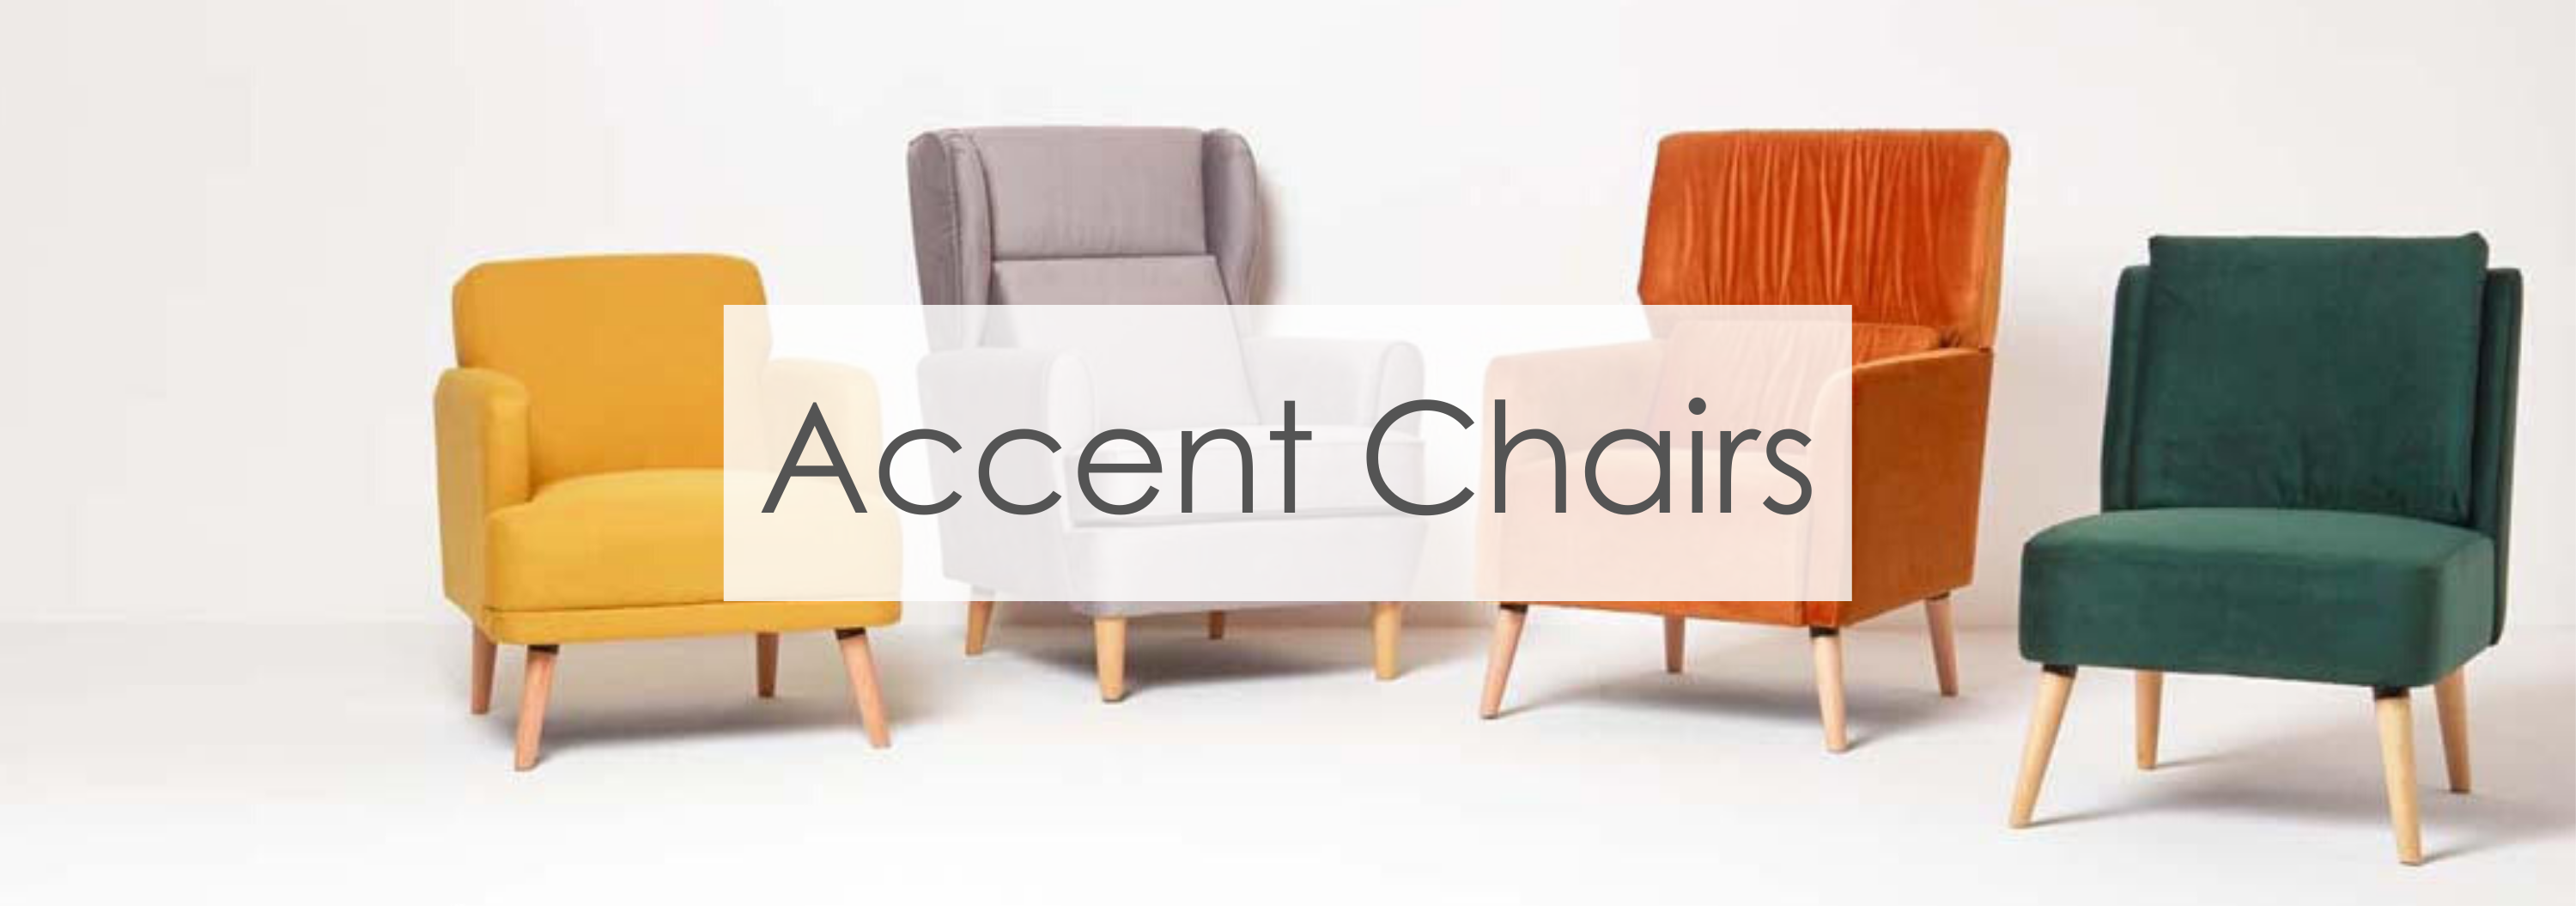 accent chairs banner